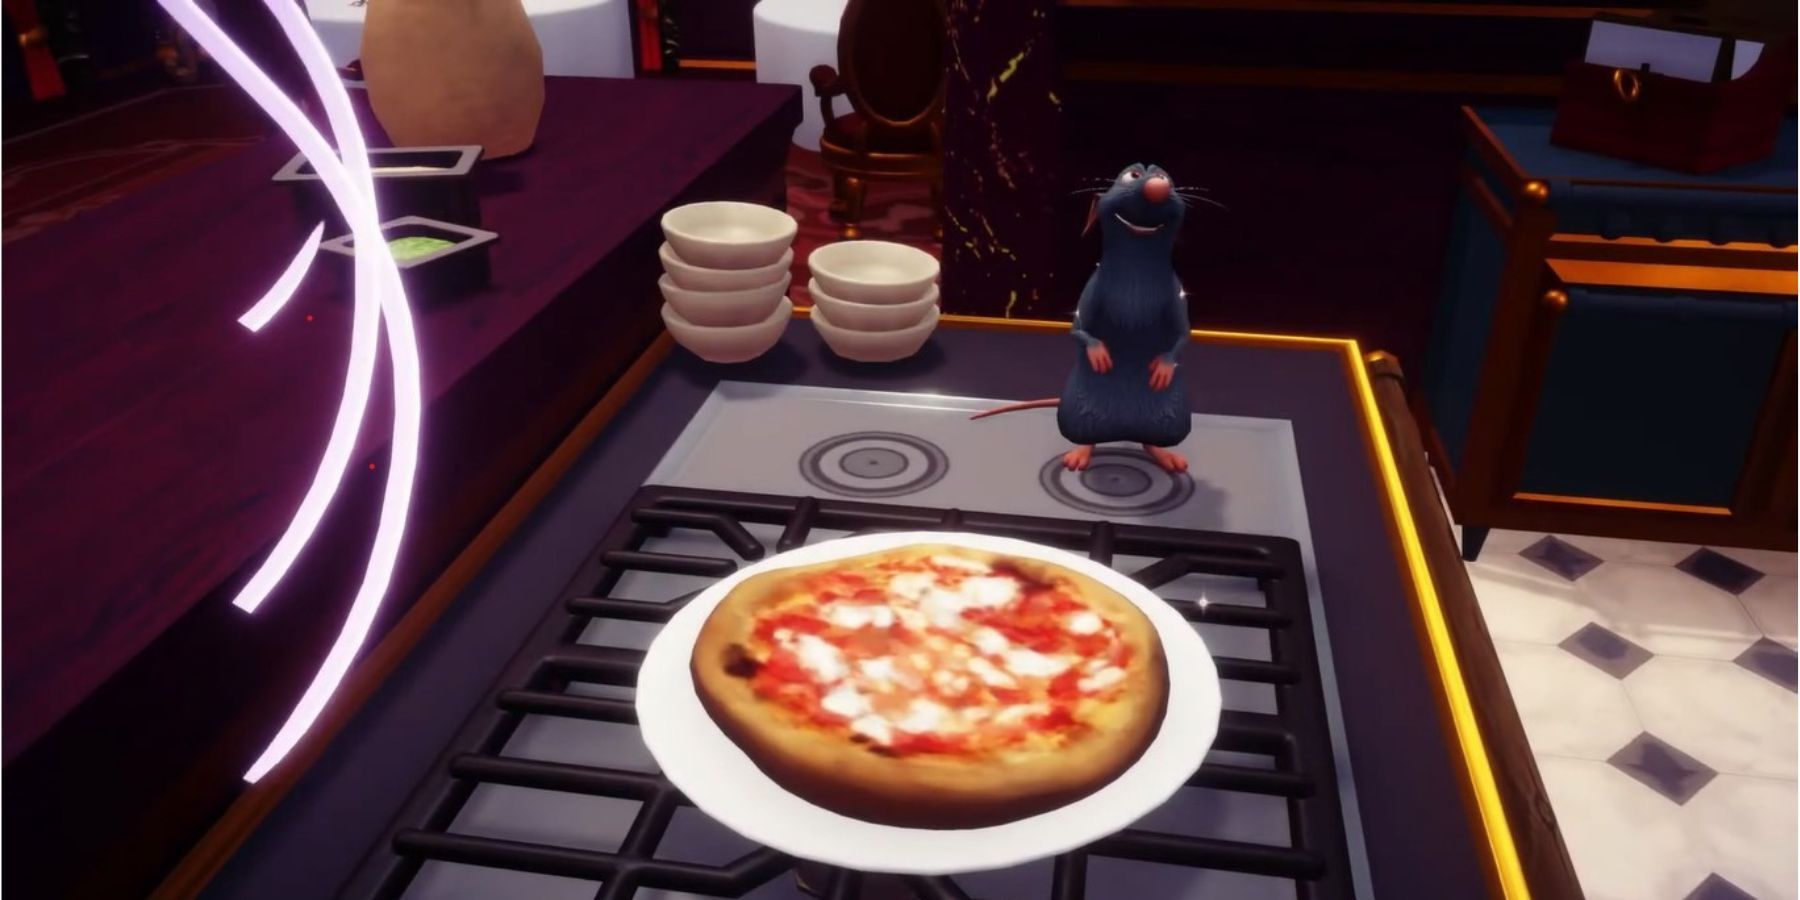 Disney Dreamlight Valley: How to Make Pizza